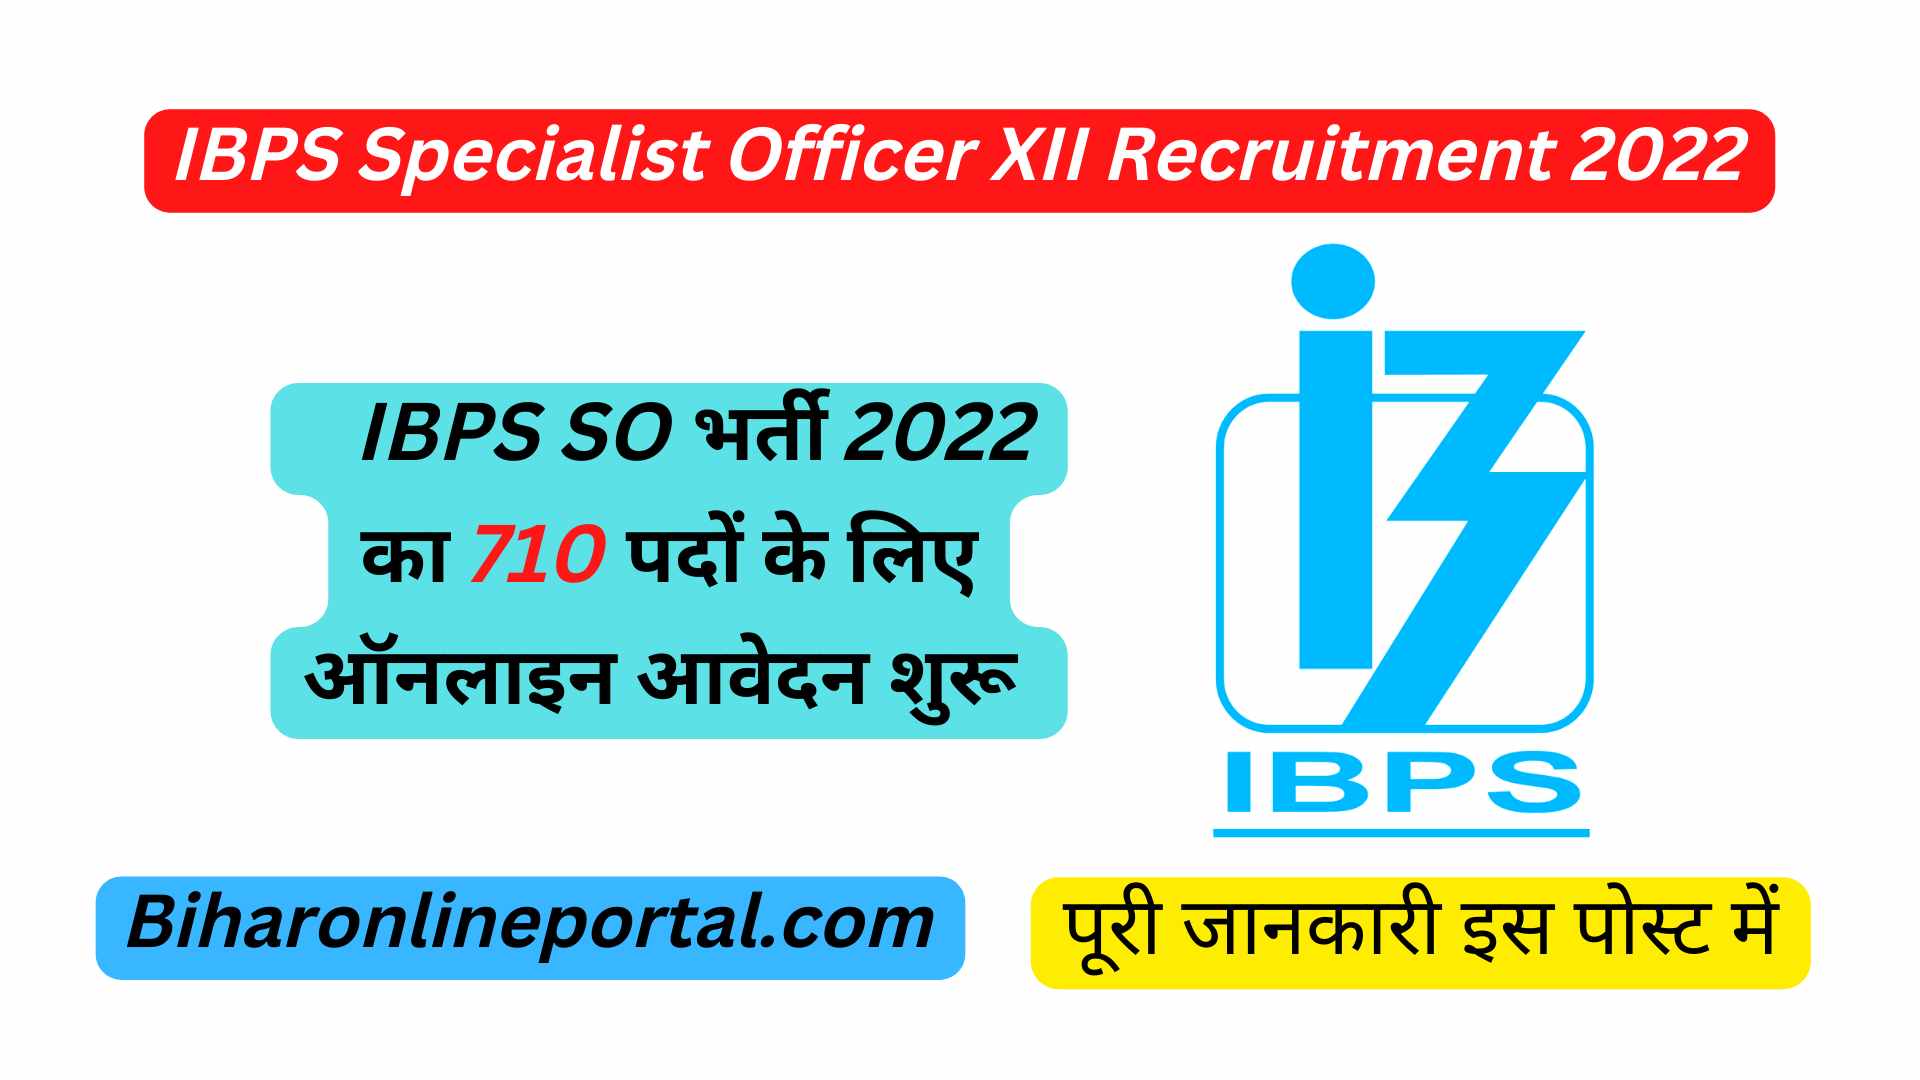 IBPS Specialist Officer XII Recruitment